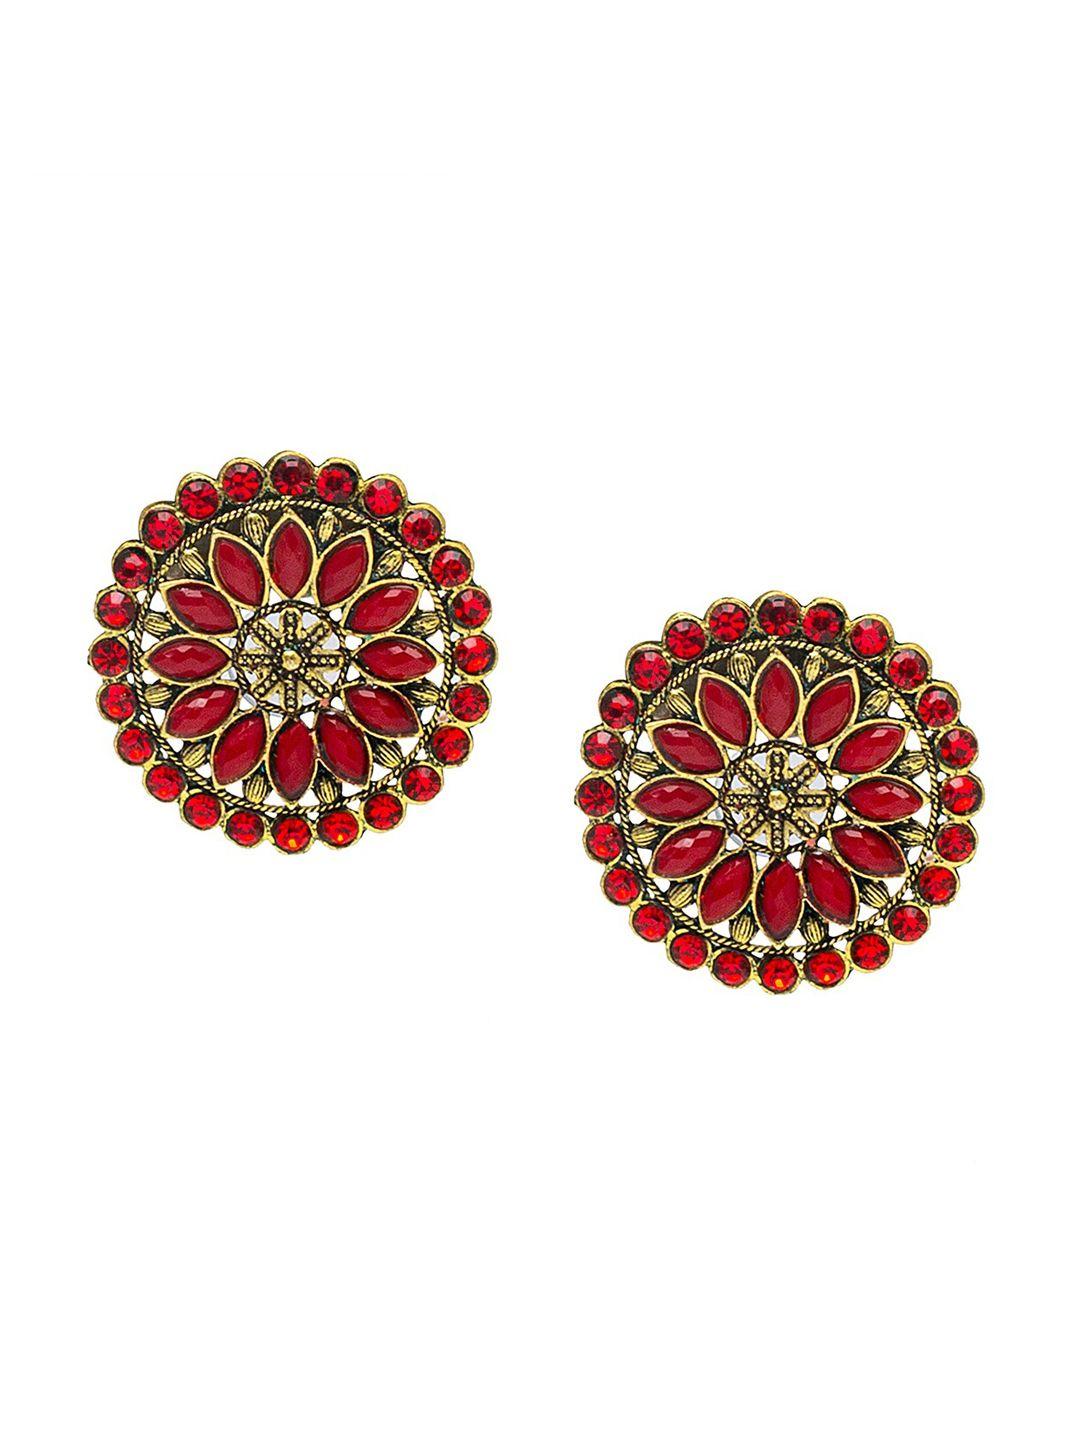 shining jewel - by shivansh gold-plated contemporary studs earrings